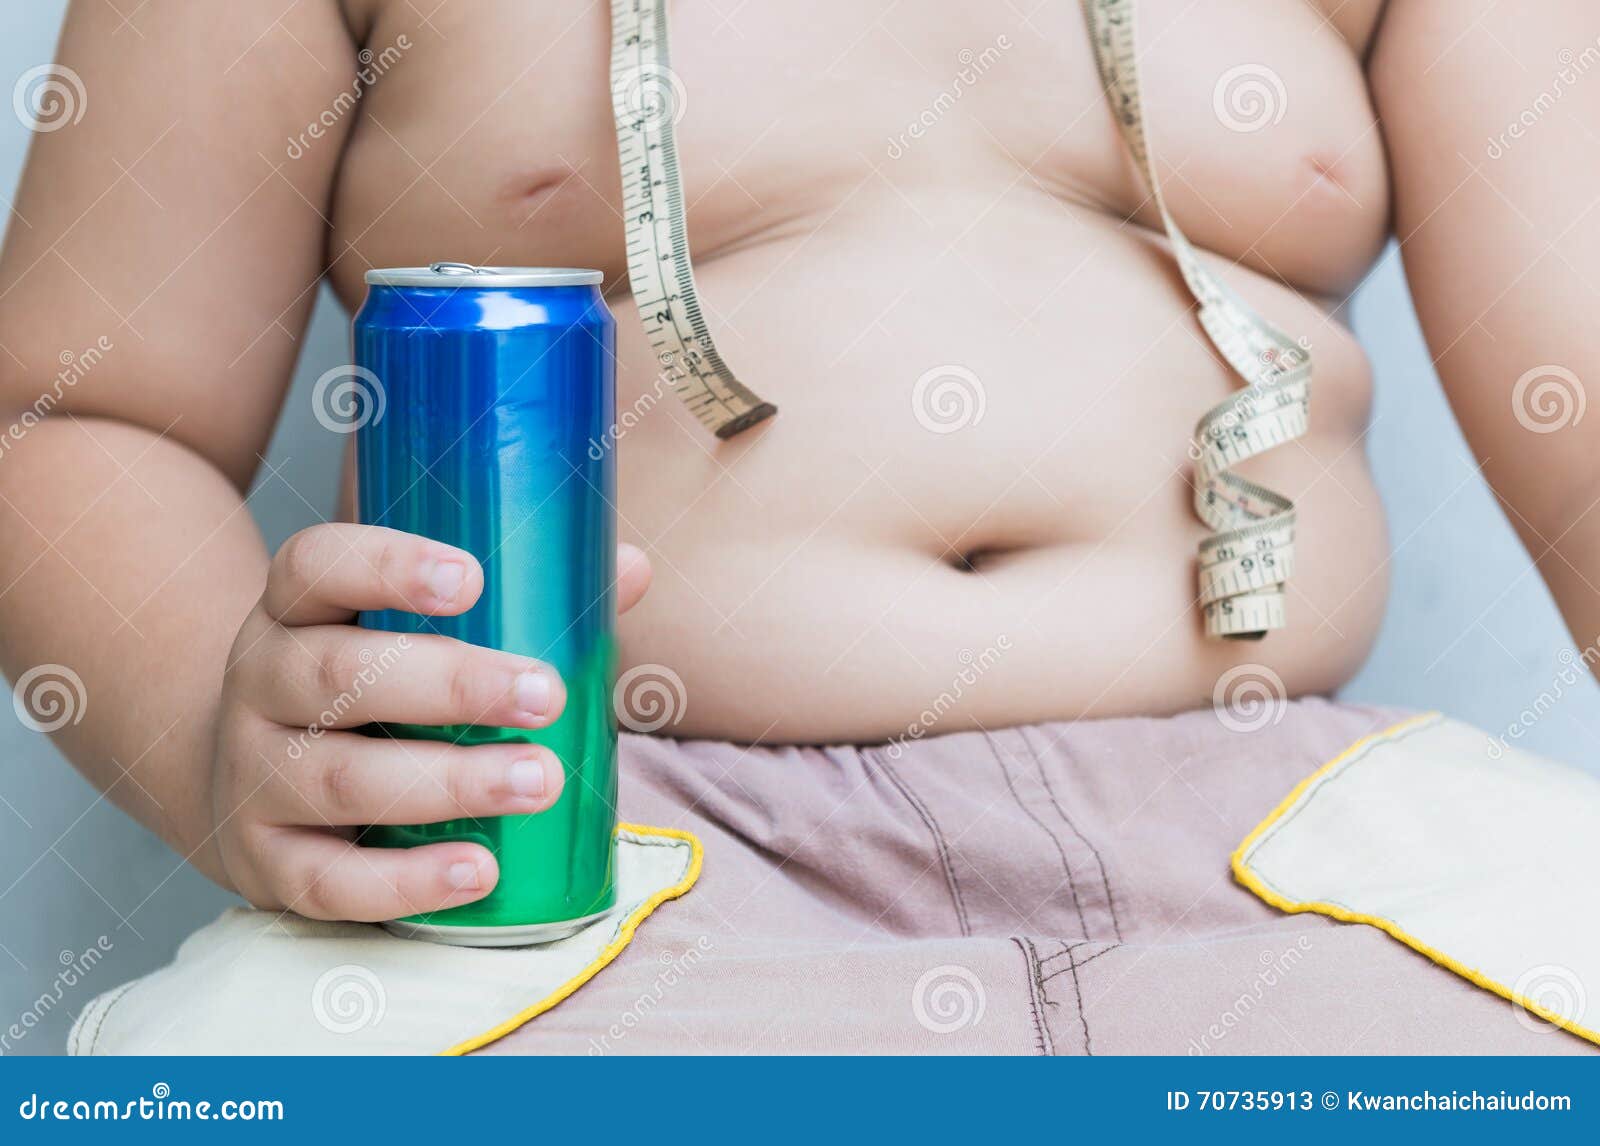 Diet. Obese Fat Boy Holding Soft Drink Can. Stock Image - Image of dieting,  dessert: 70735913